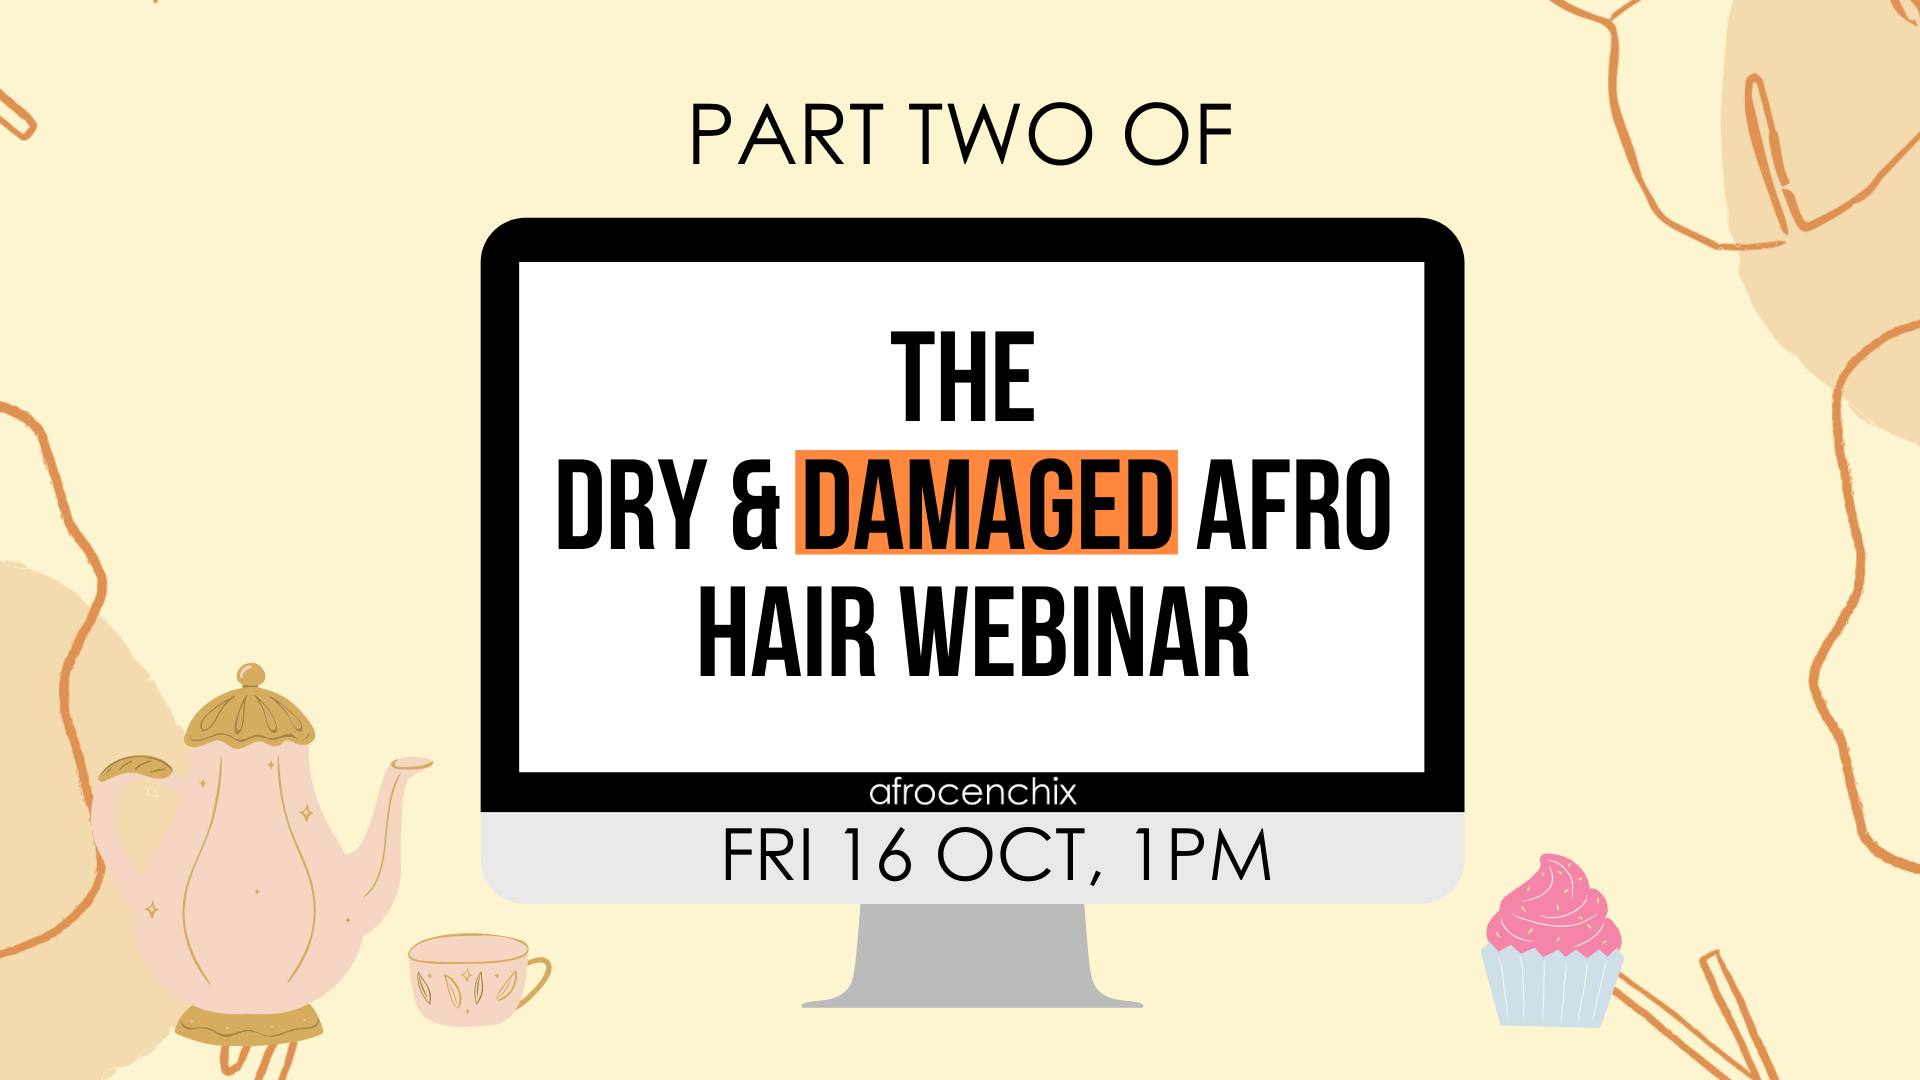 Afrocenchix Presents: Part 2 of the Dry & Damaged Afro Hair Webinar